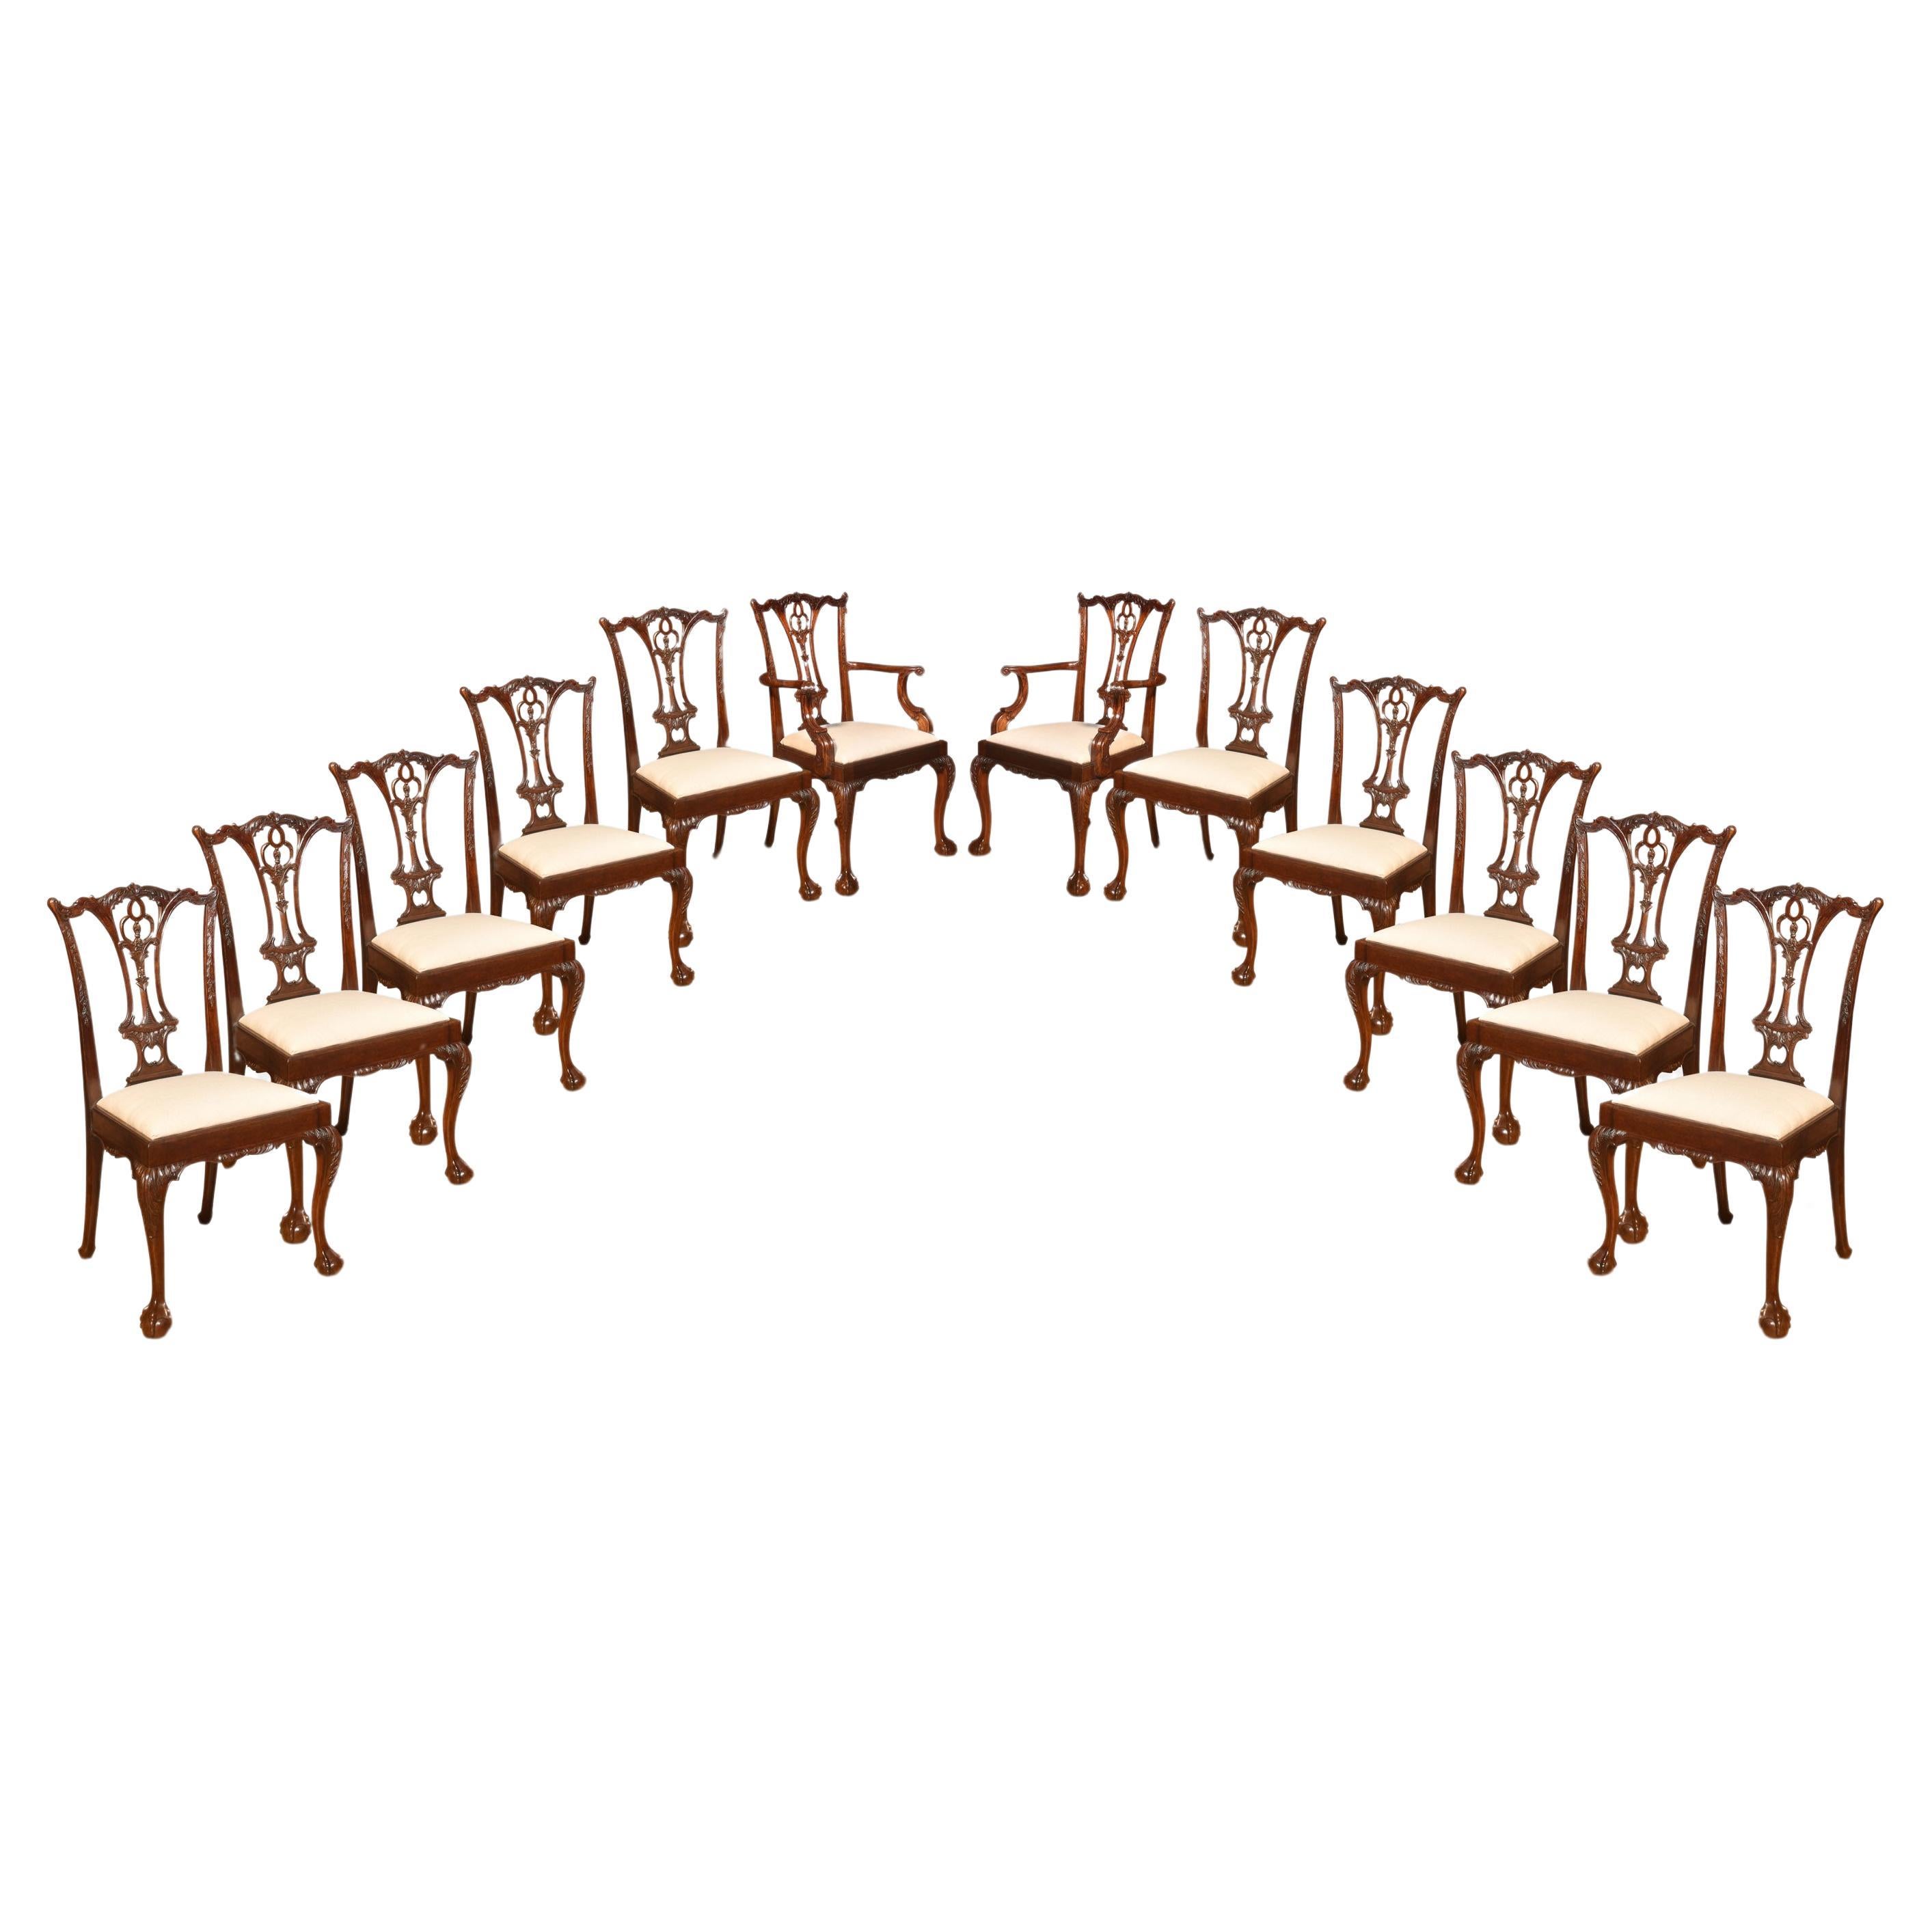 set of twelve mahogany dining chairs in Chippendale style